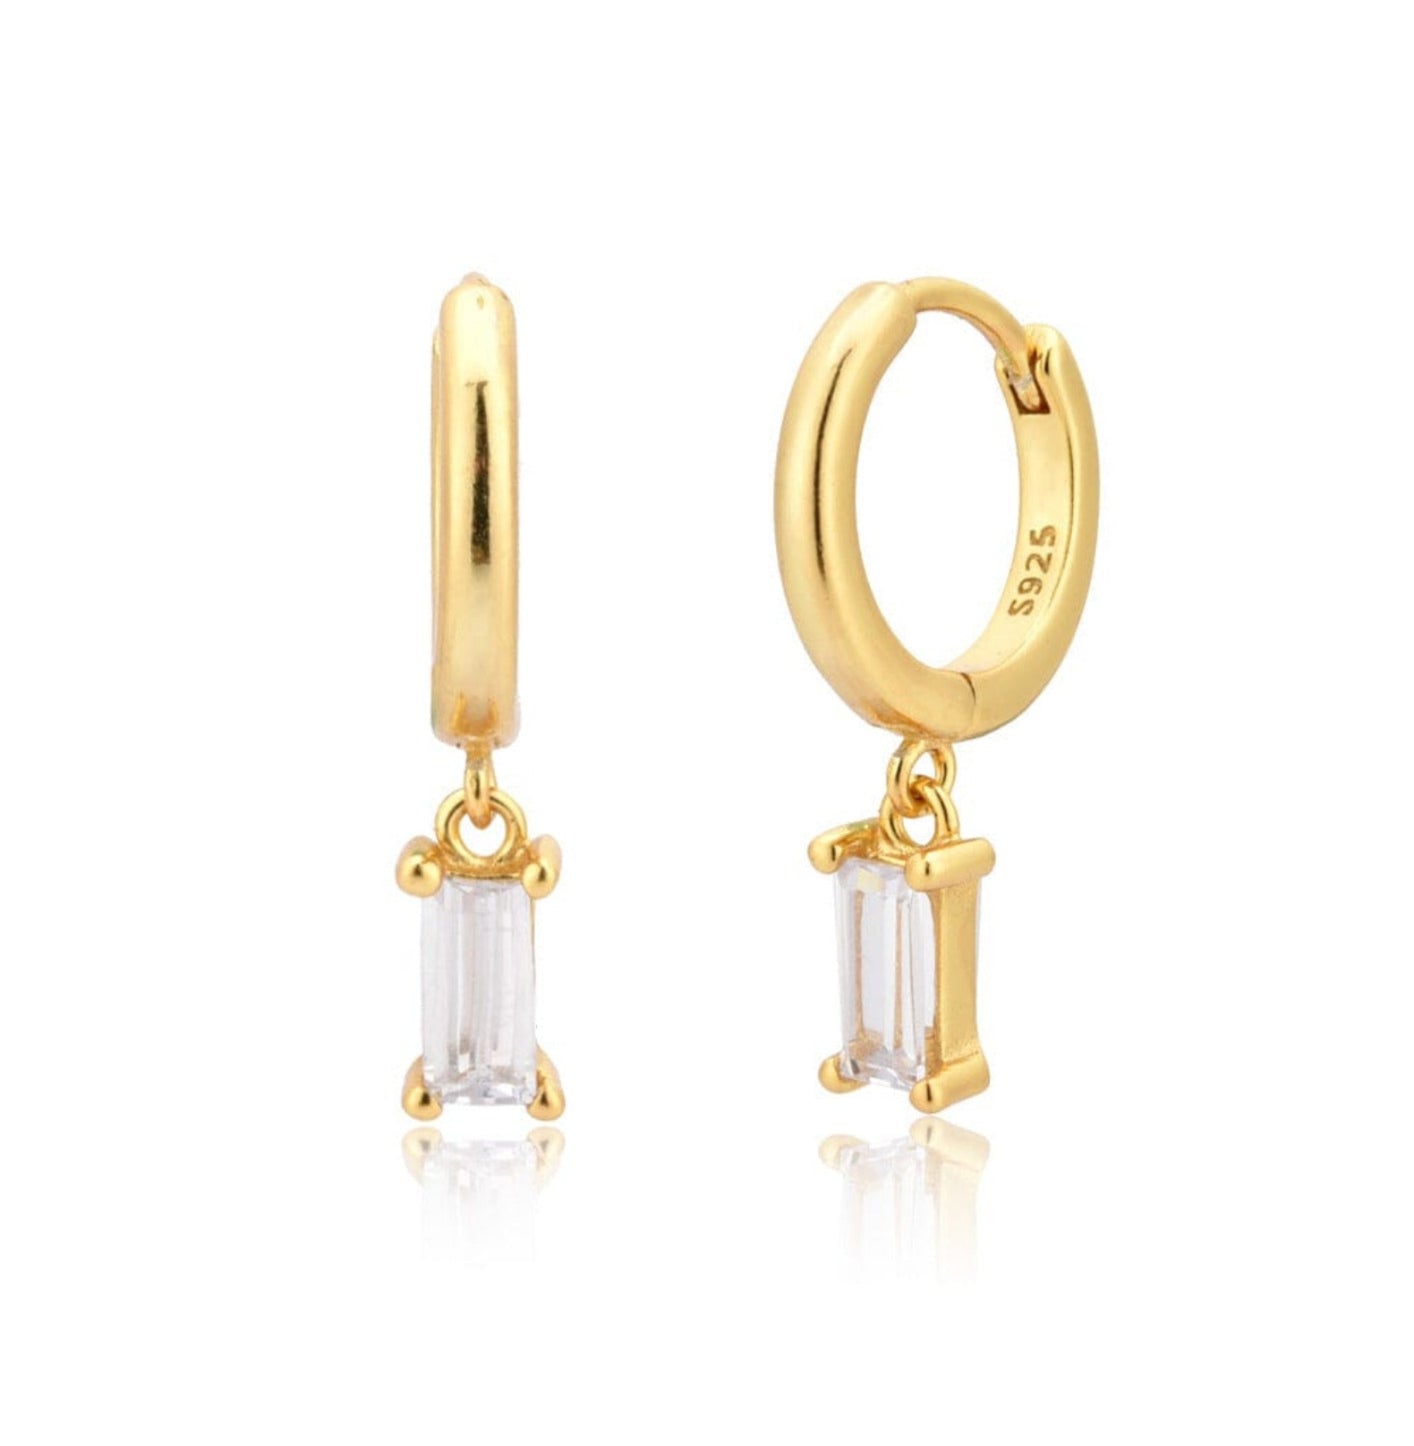 DAINTY EARRINGS earing Yubama Jewelry Online Store - The Elegant Designs of Gold and Silver ! Gold Transparent 